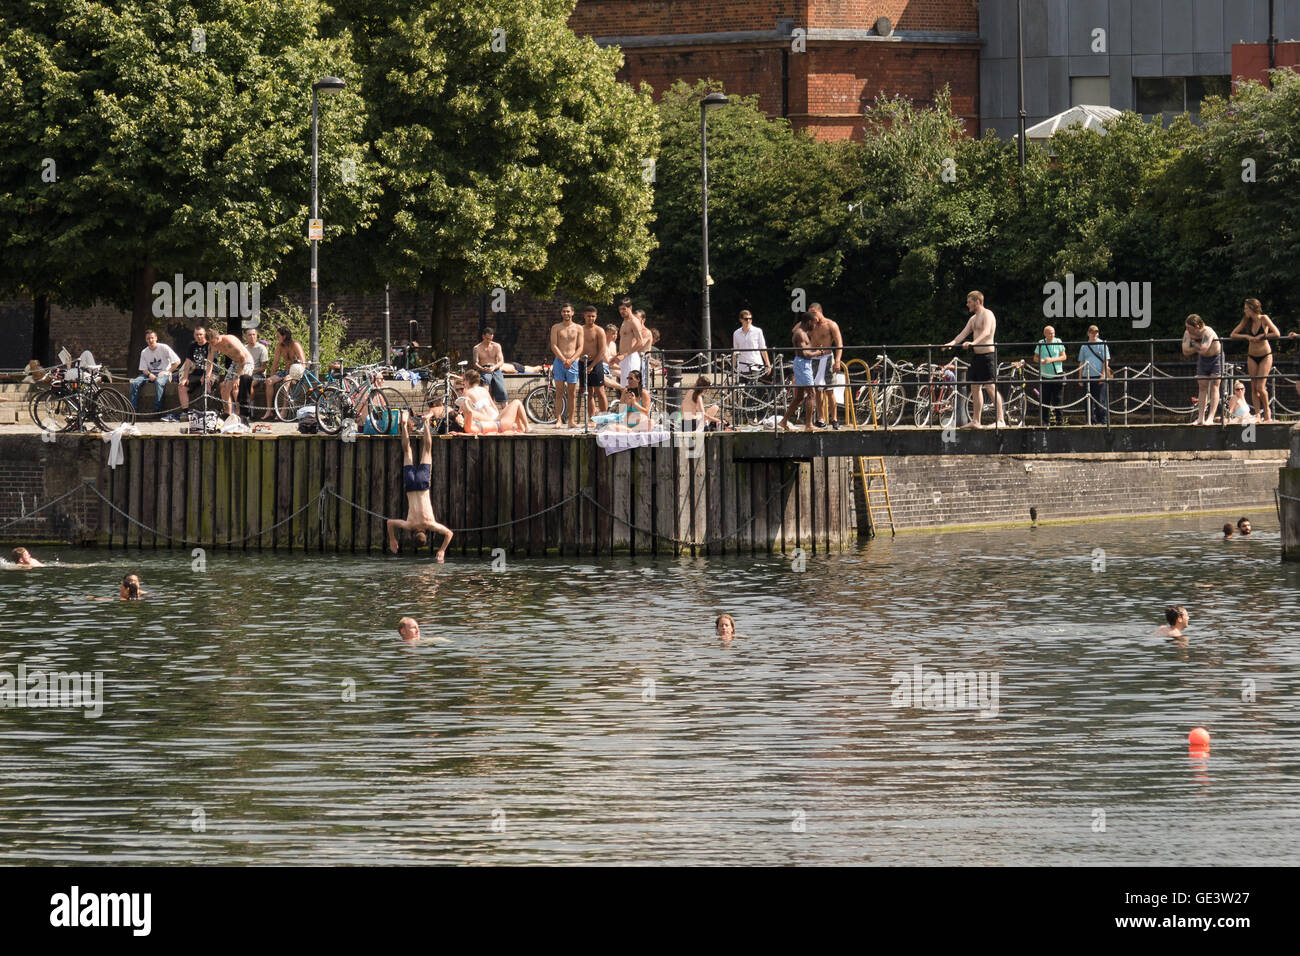 People enjoying the cold water during hot sunny weather at Shadwell Basin in east London this afternoon. People have been warned not to swim in Shadwell Basin after a man drowned and died this week. Stock Photo